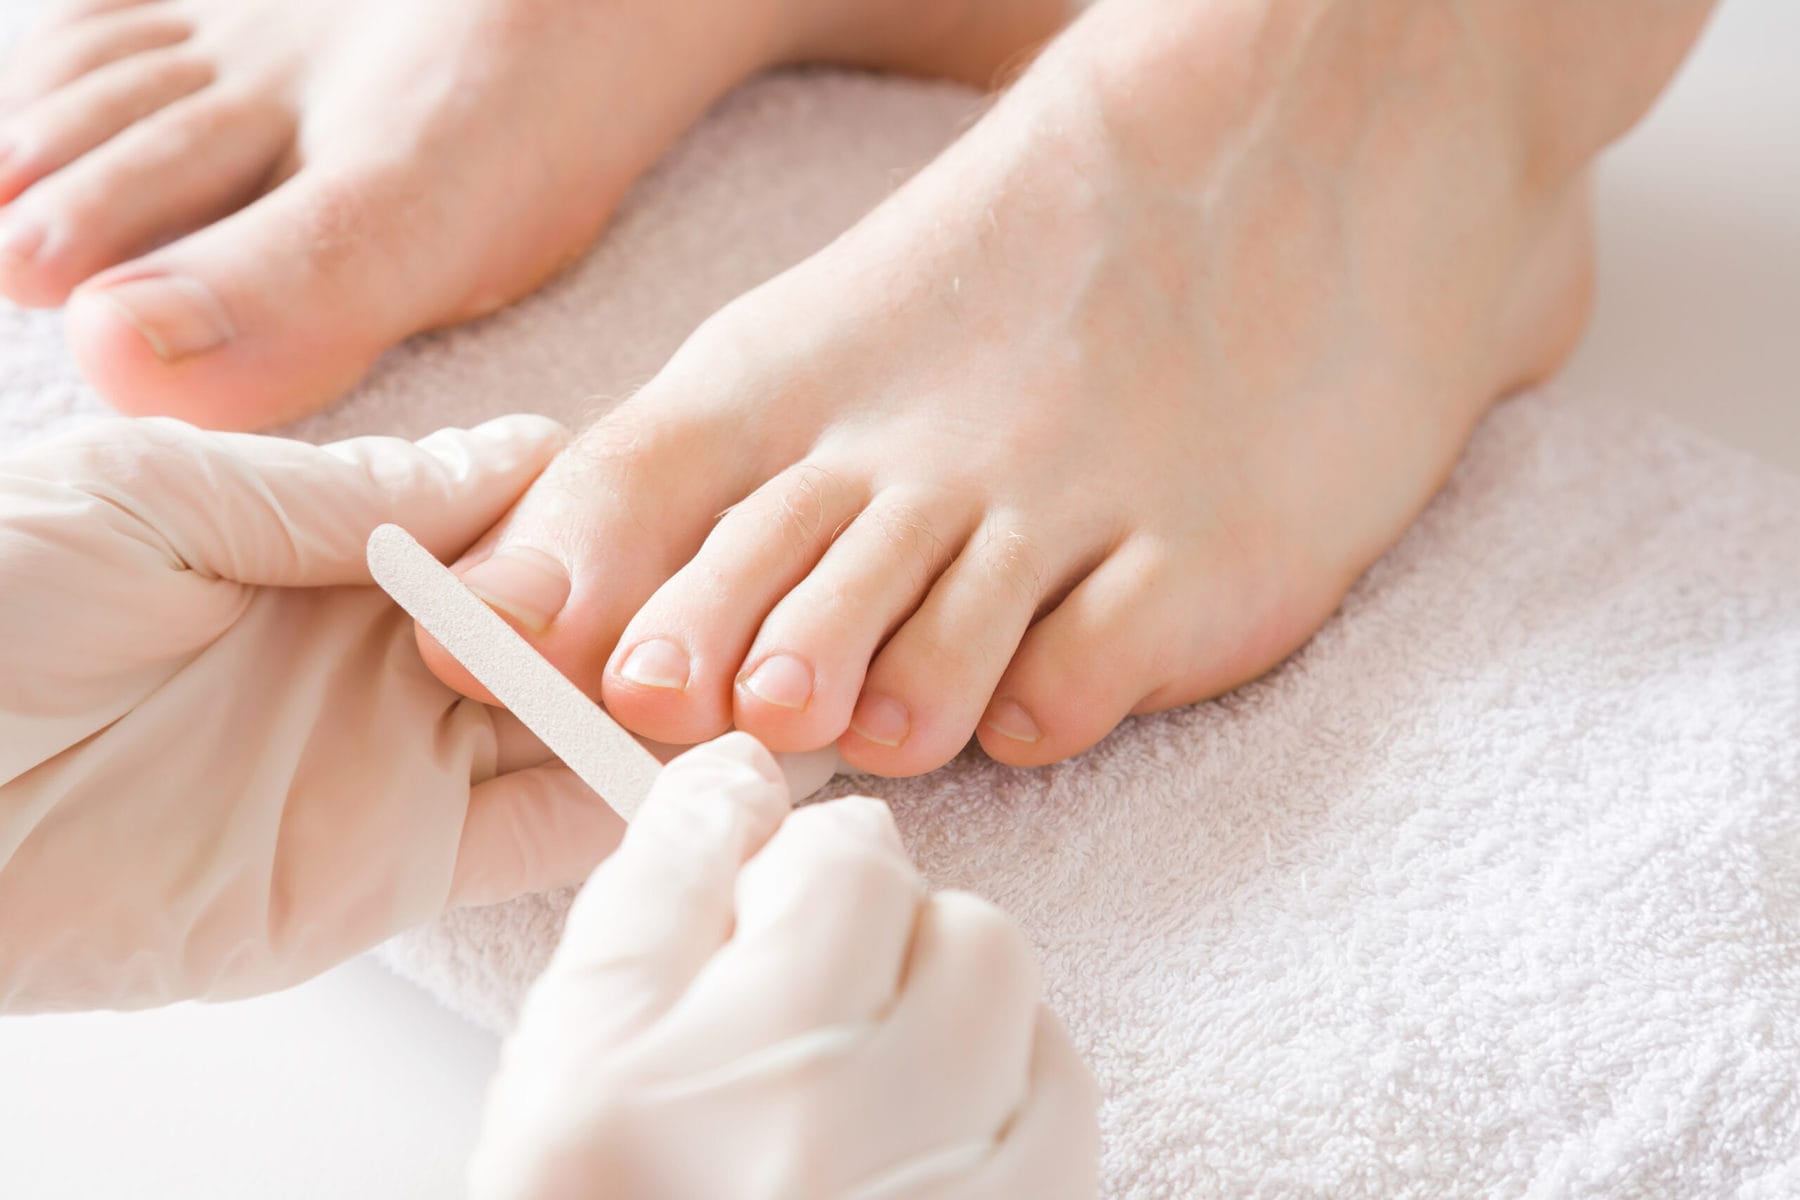 Pedicurist's,Hands,In,Protective,Rubber,Gloves,Filing,Toenails,With,Nail